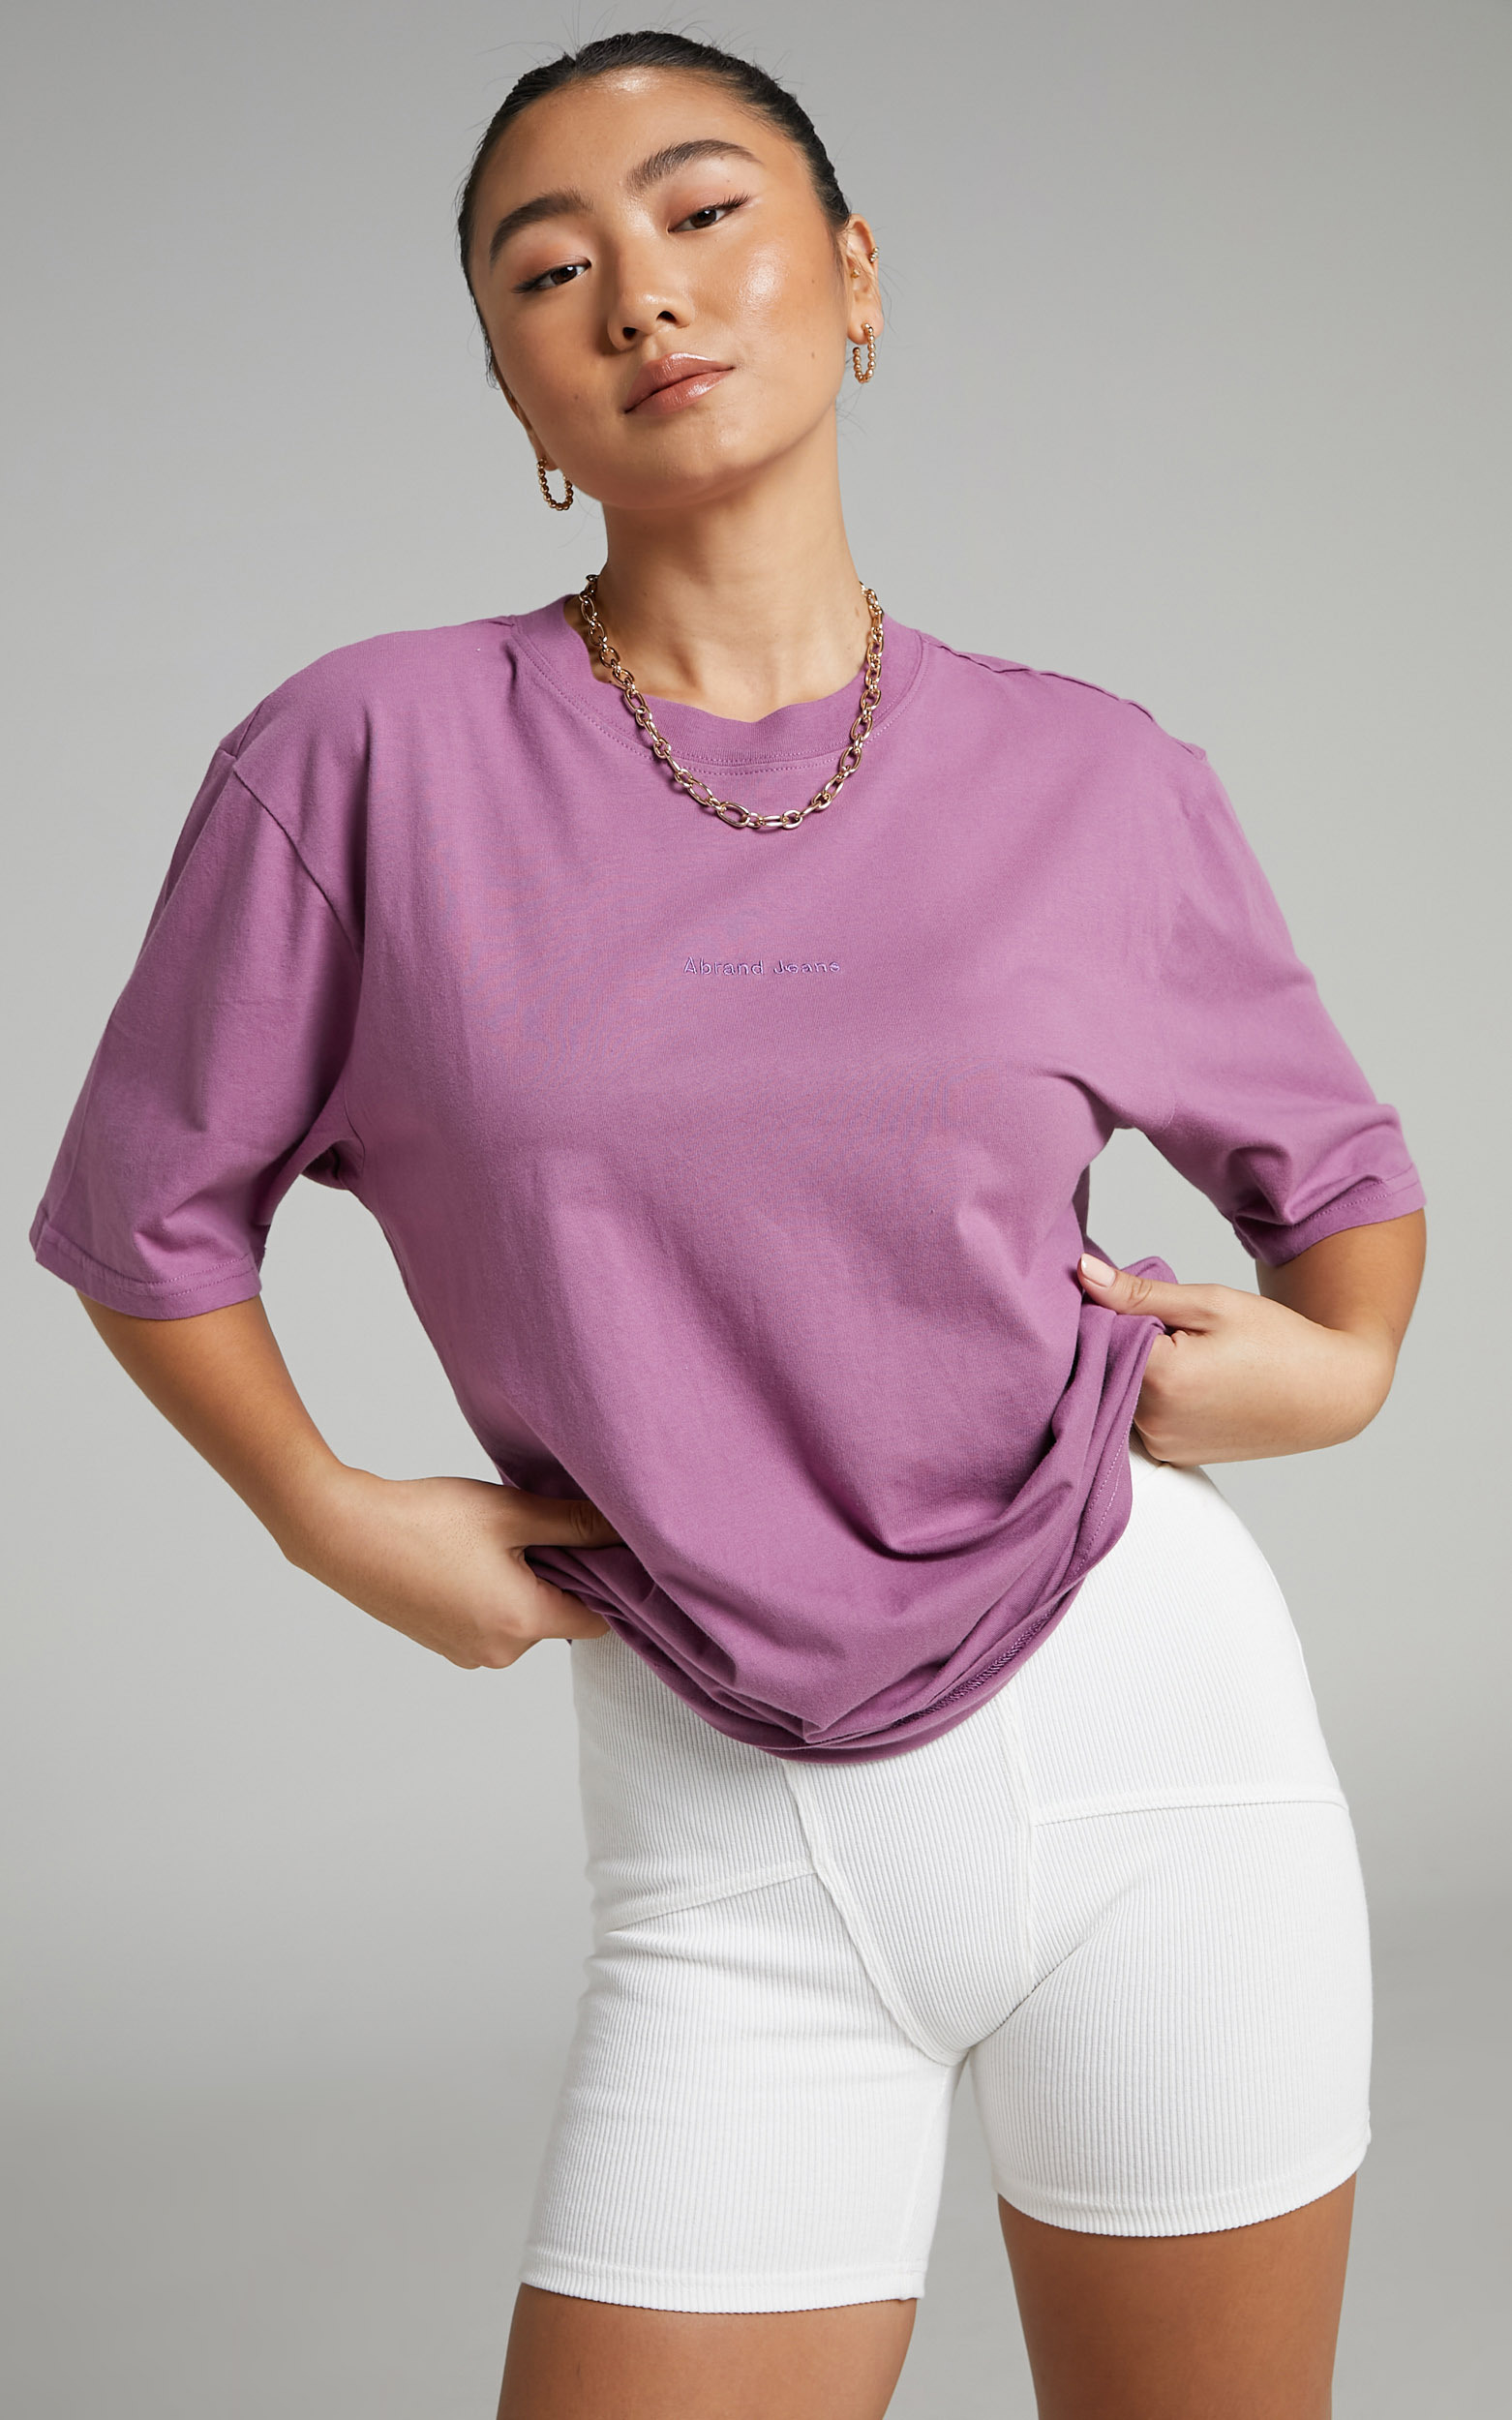 Abrand - A Brother Tee in Violet - L, PRP1, hi-res image number null